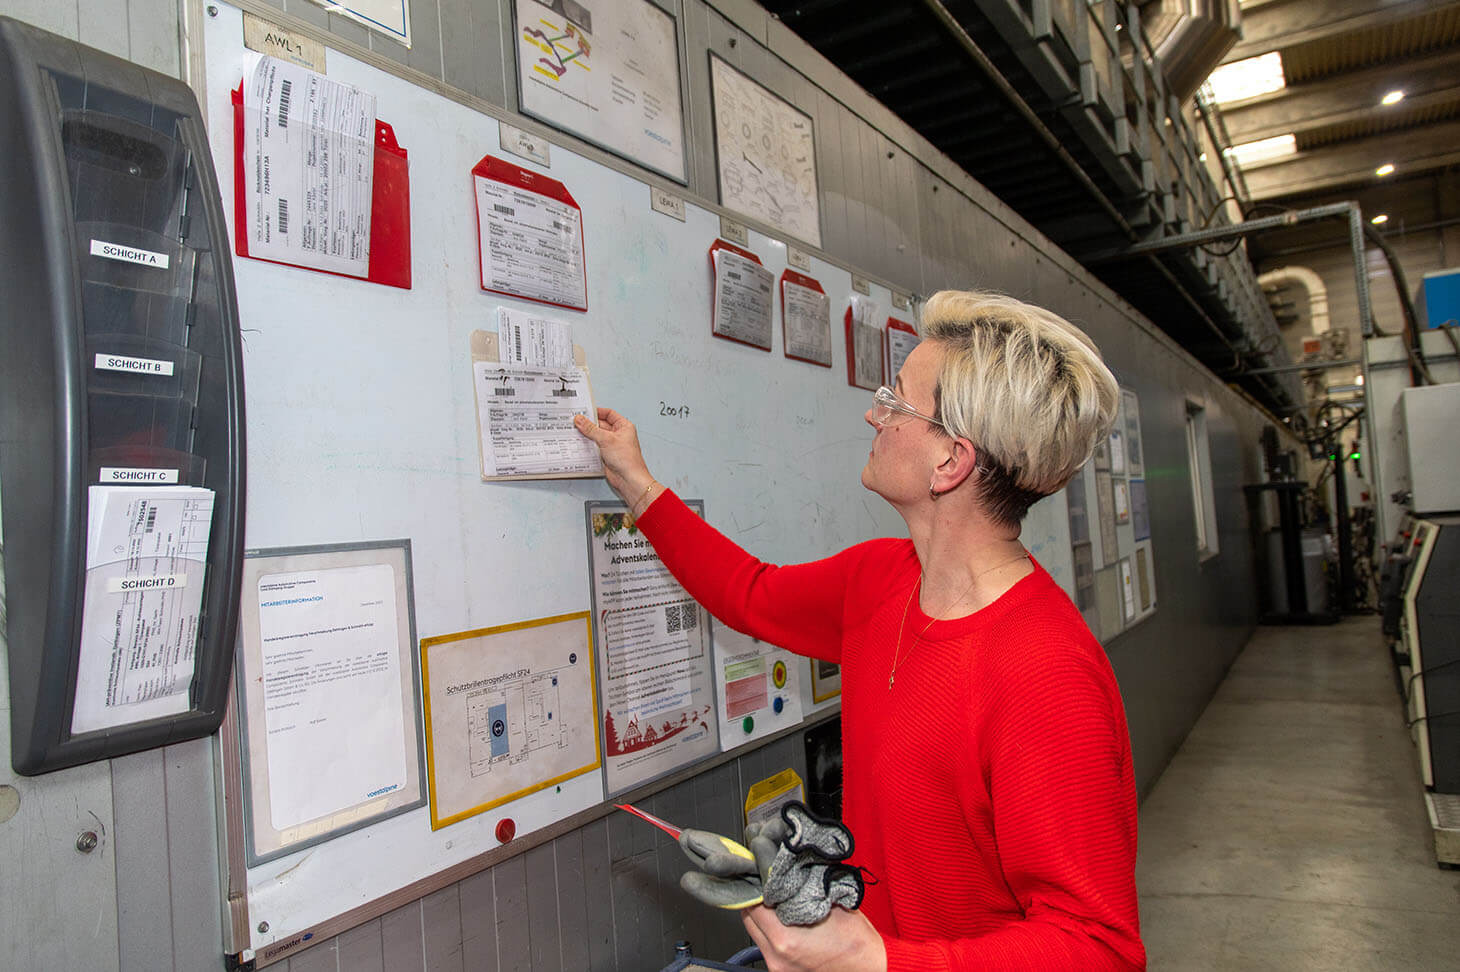 Fabienne Krause hangs information on the wall on which shift schedules are displayed